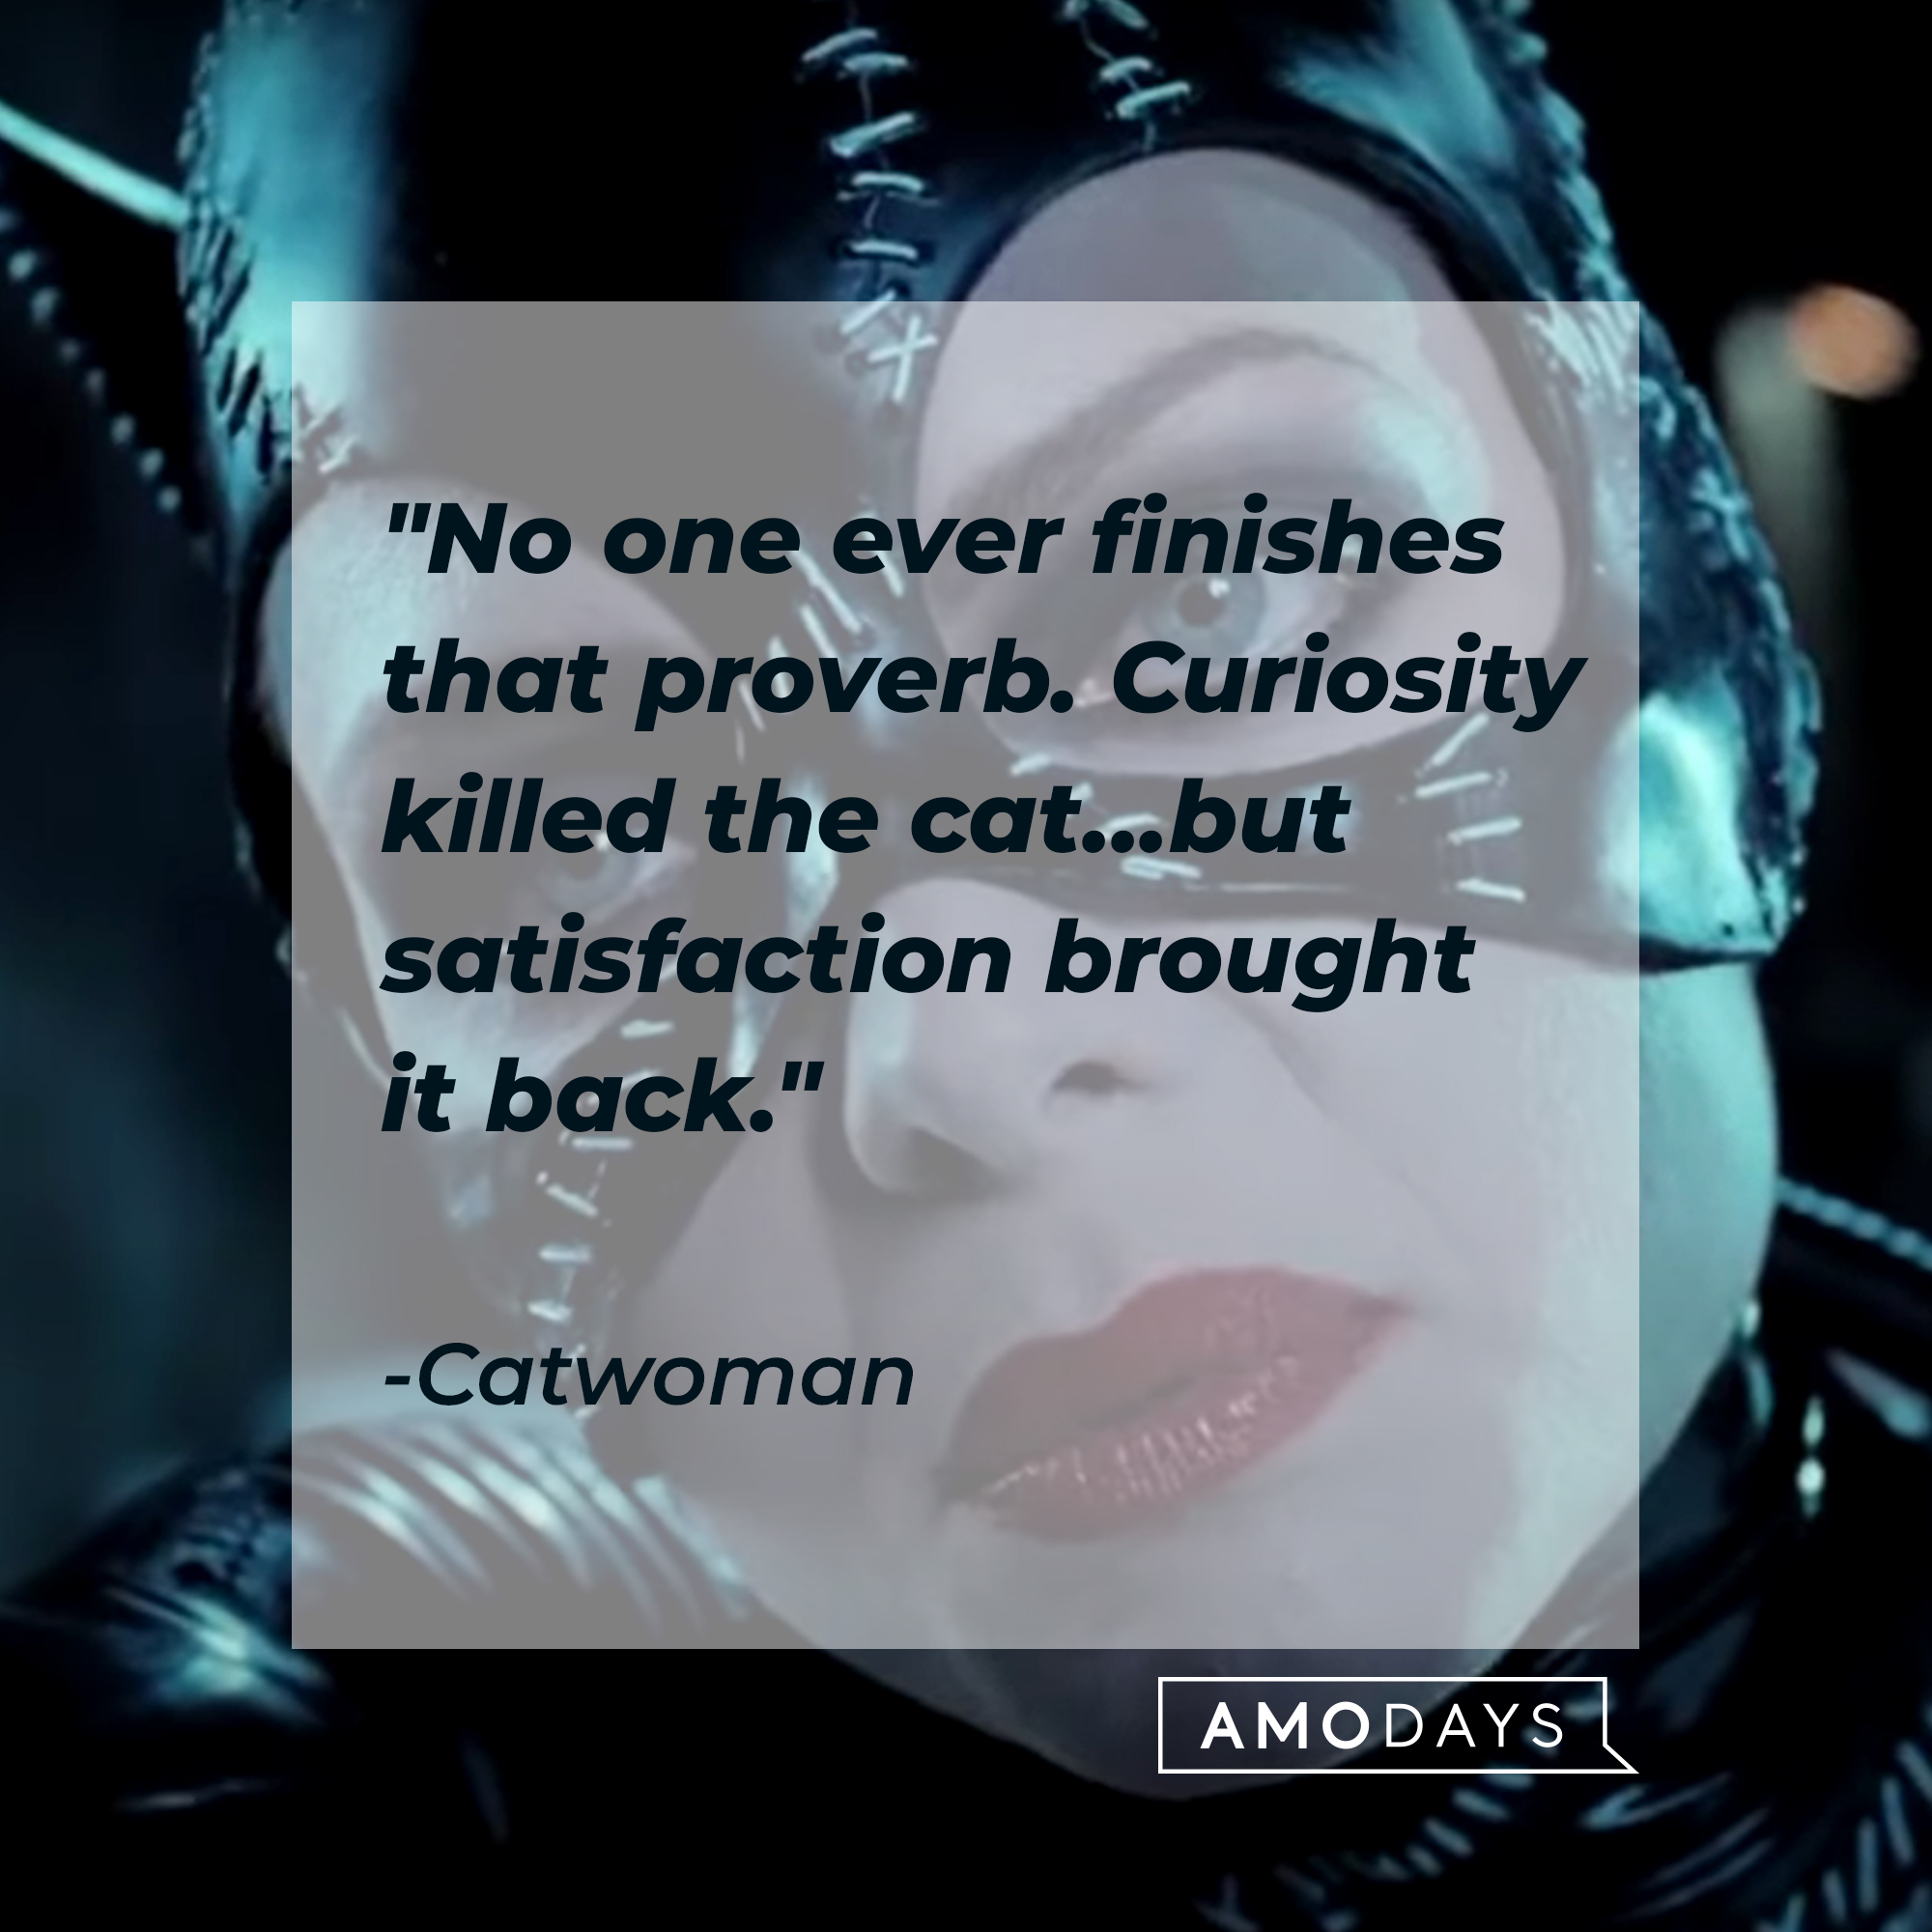 Catwoman's quote: "No one ever finishes that proverb. Curiosity killed the cat…but satisfaction brought it back." | Source: facebook.com/dc